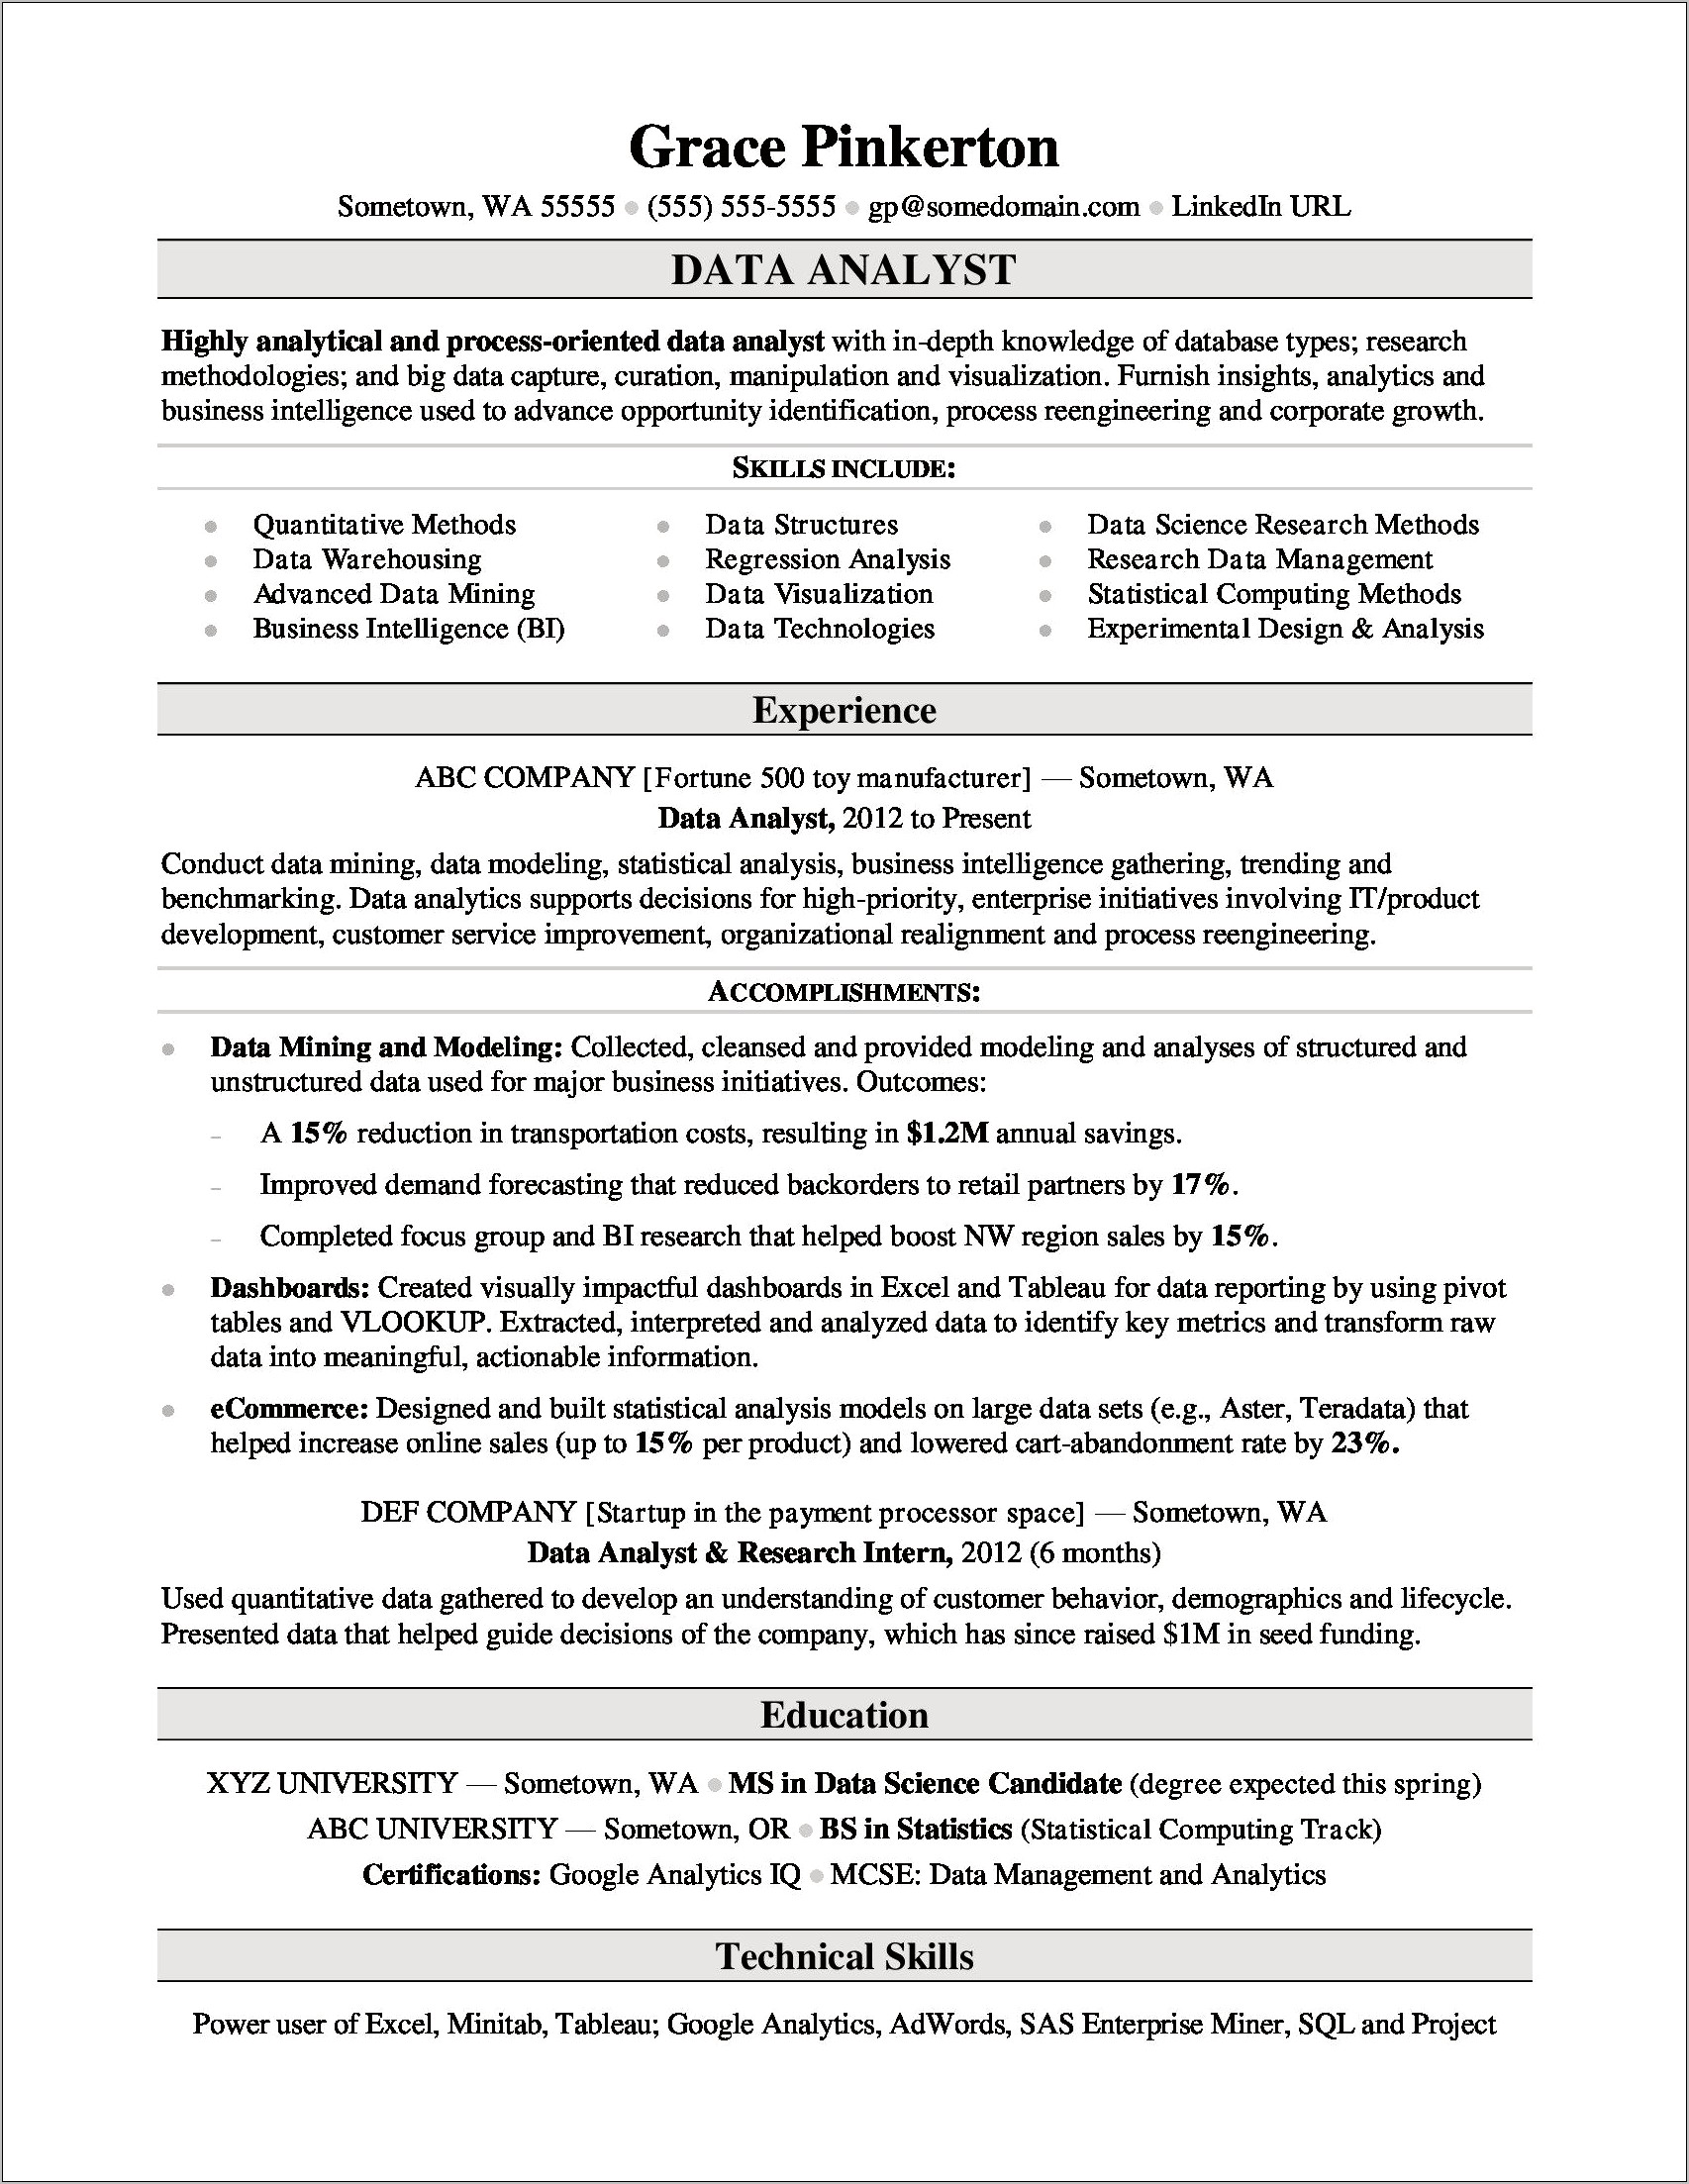 Samples Of Bio Or Professional Summary For Resume